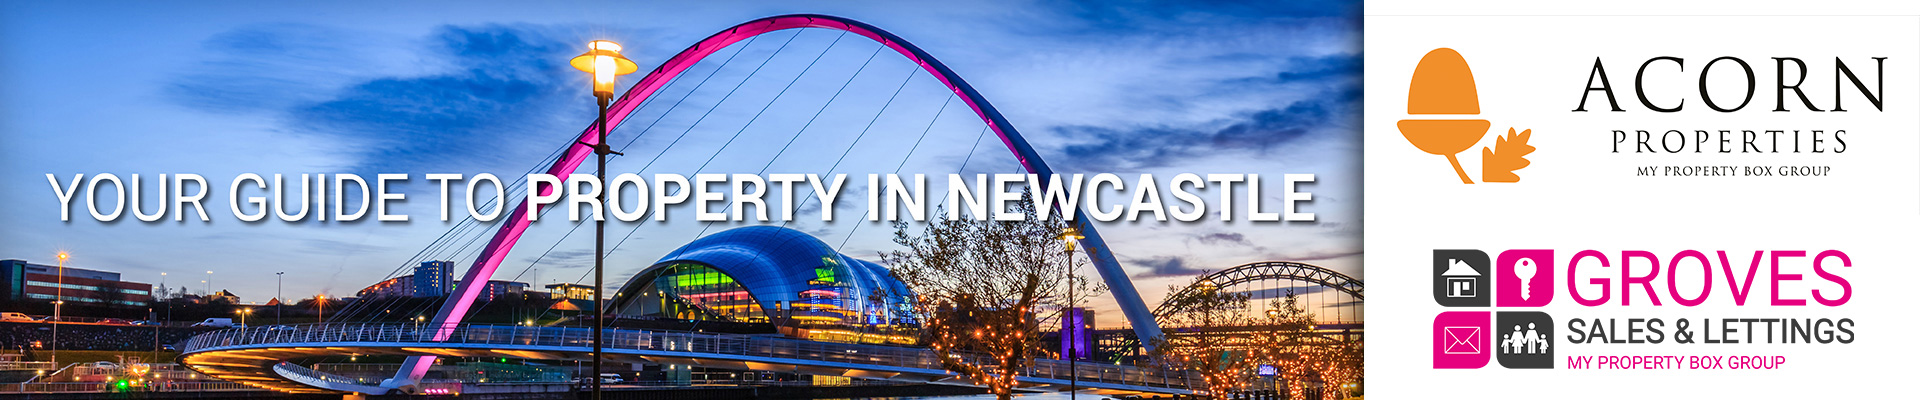 Your guide to property in Newcastle